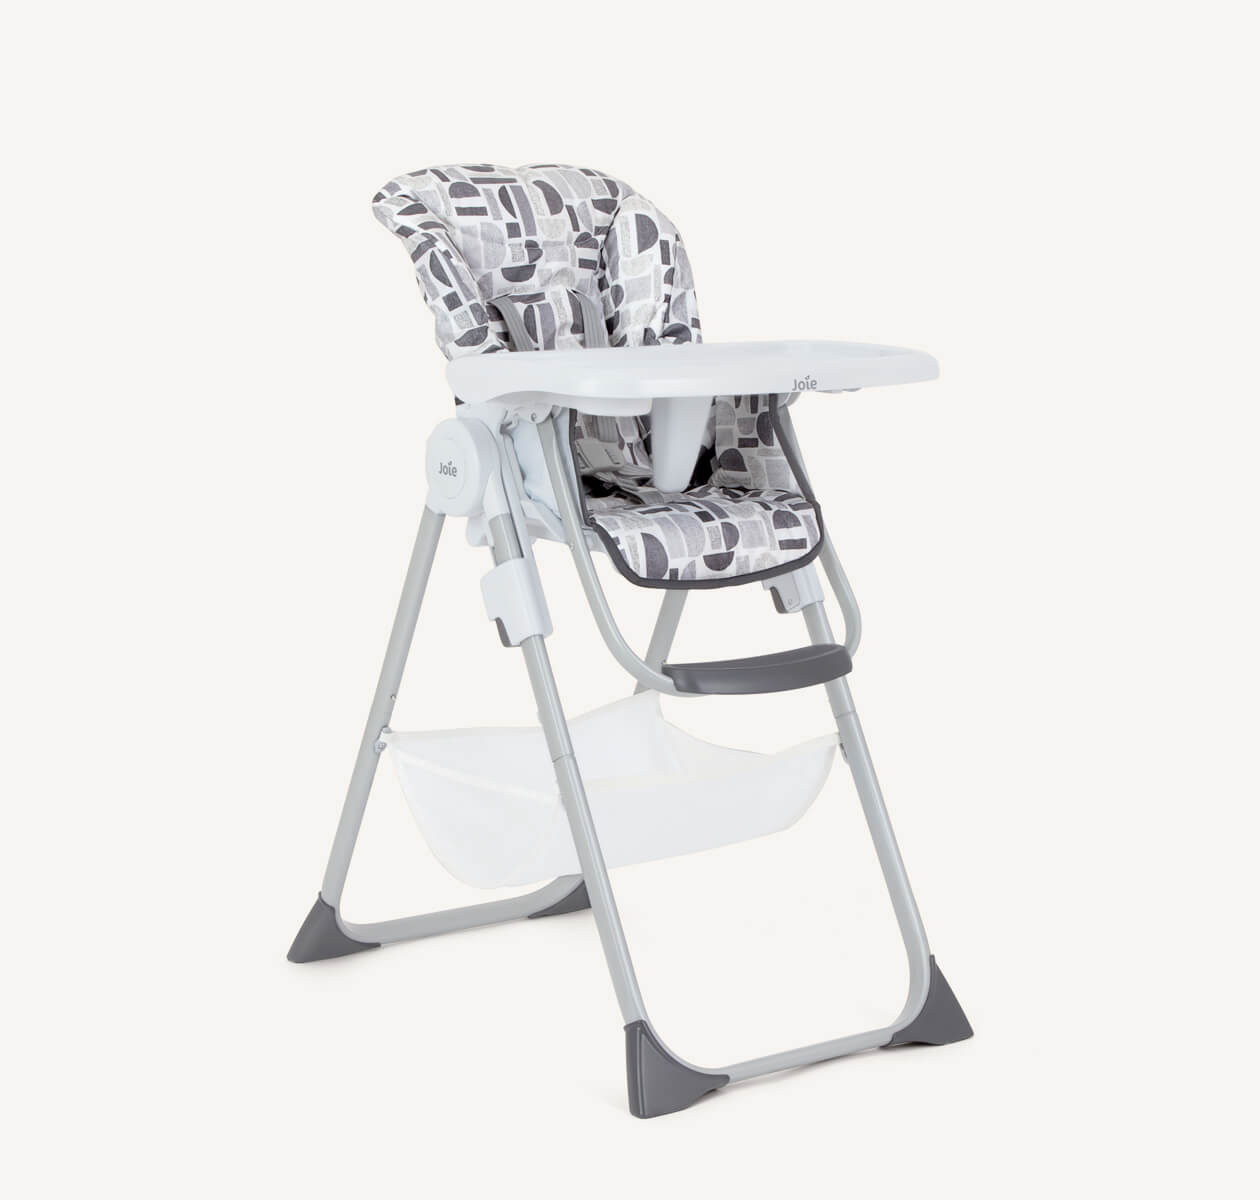 The Joie highchair Snacker 2in1 in a gray monotone print featuring geometric shapes in various shades and textures of gray from a right angle. 